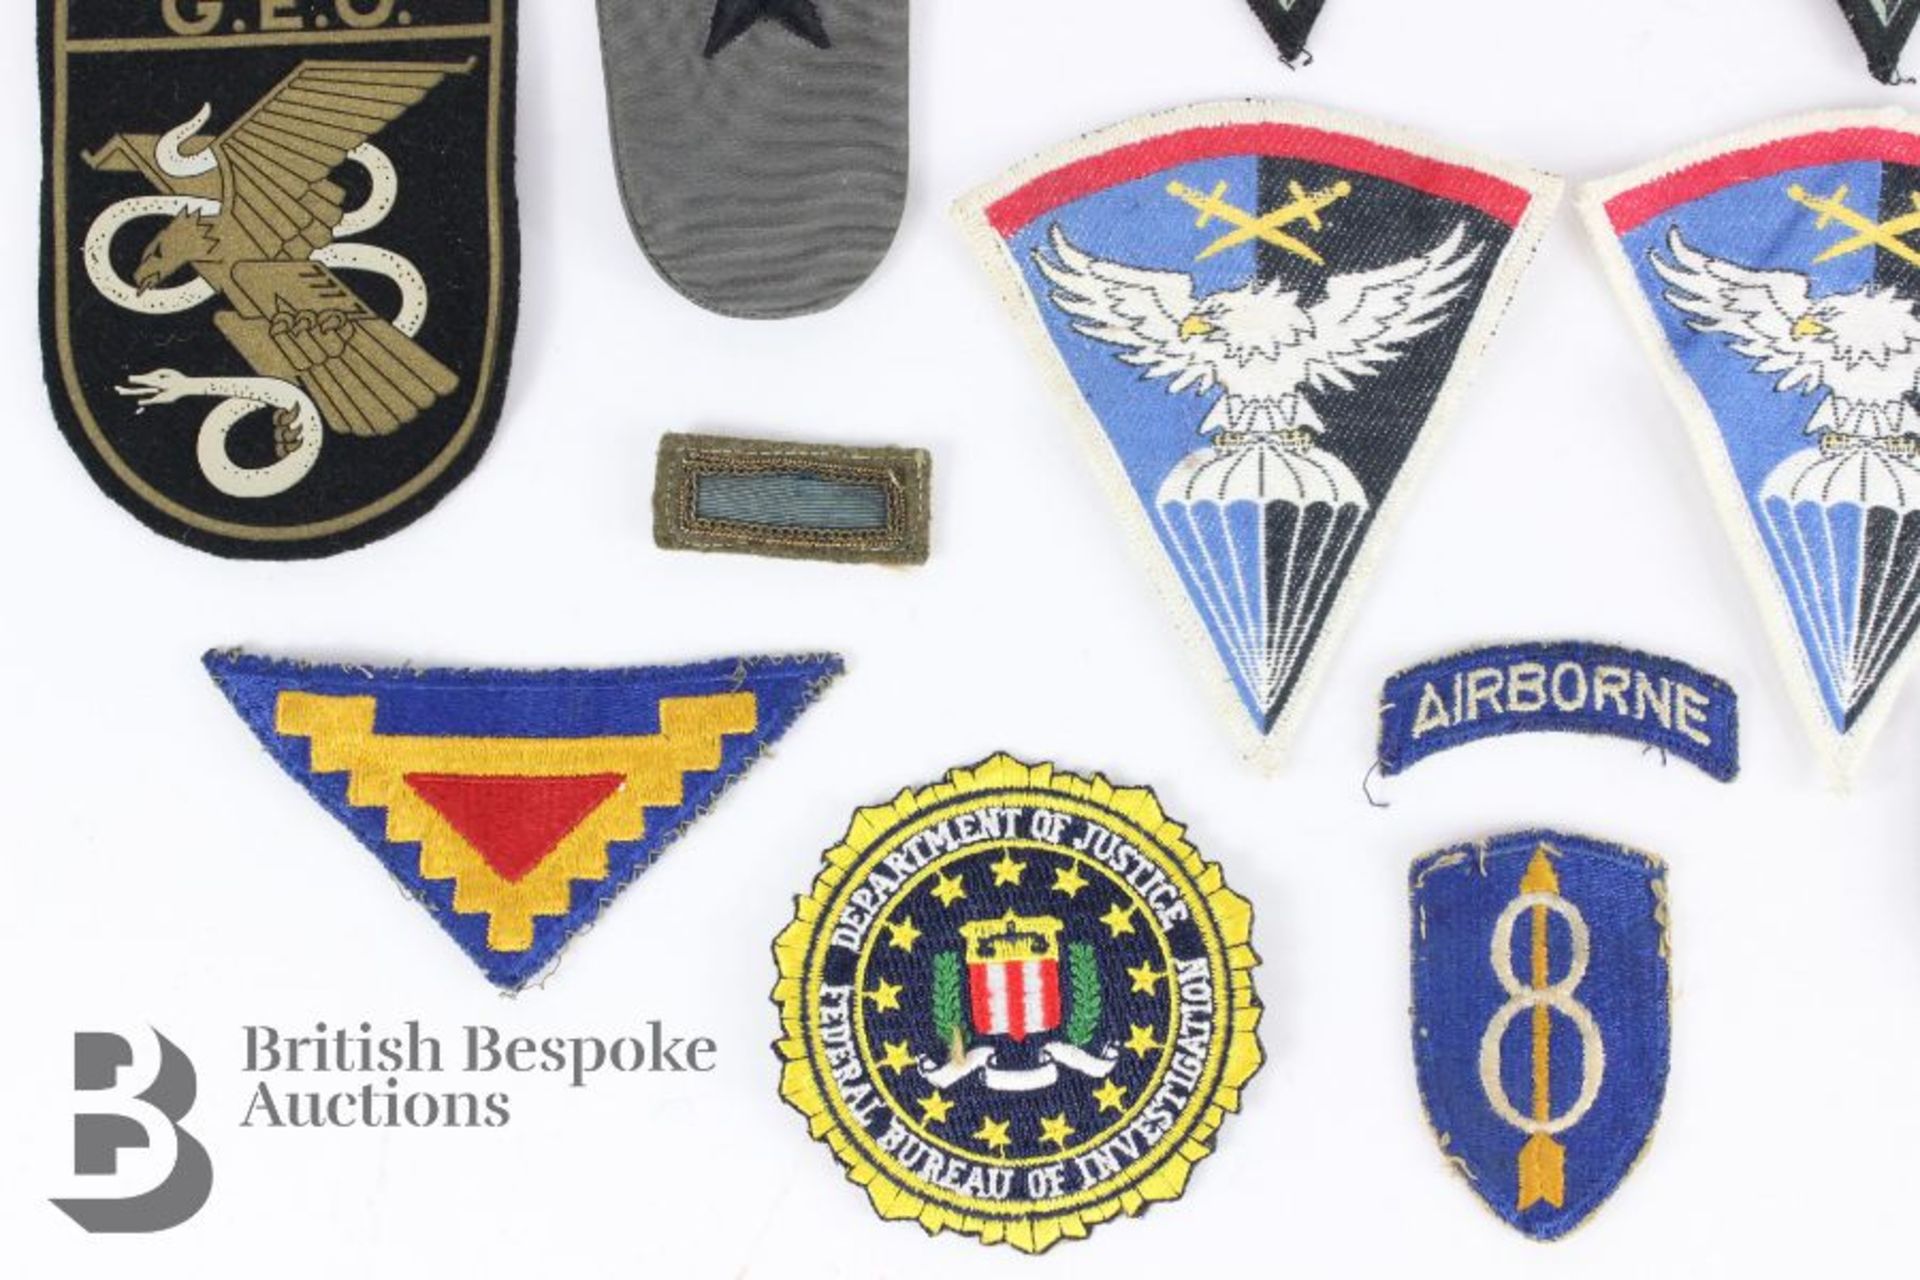 Royal Air Force and Air Training Corps Insignia and Metal Badges, Canadian Airborne Badges - Image 9 of 11